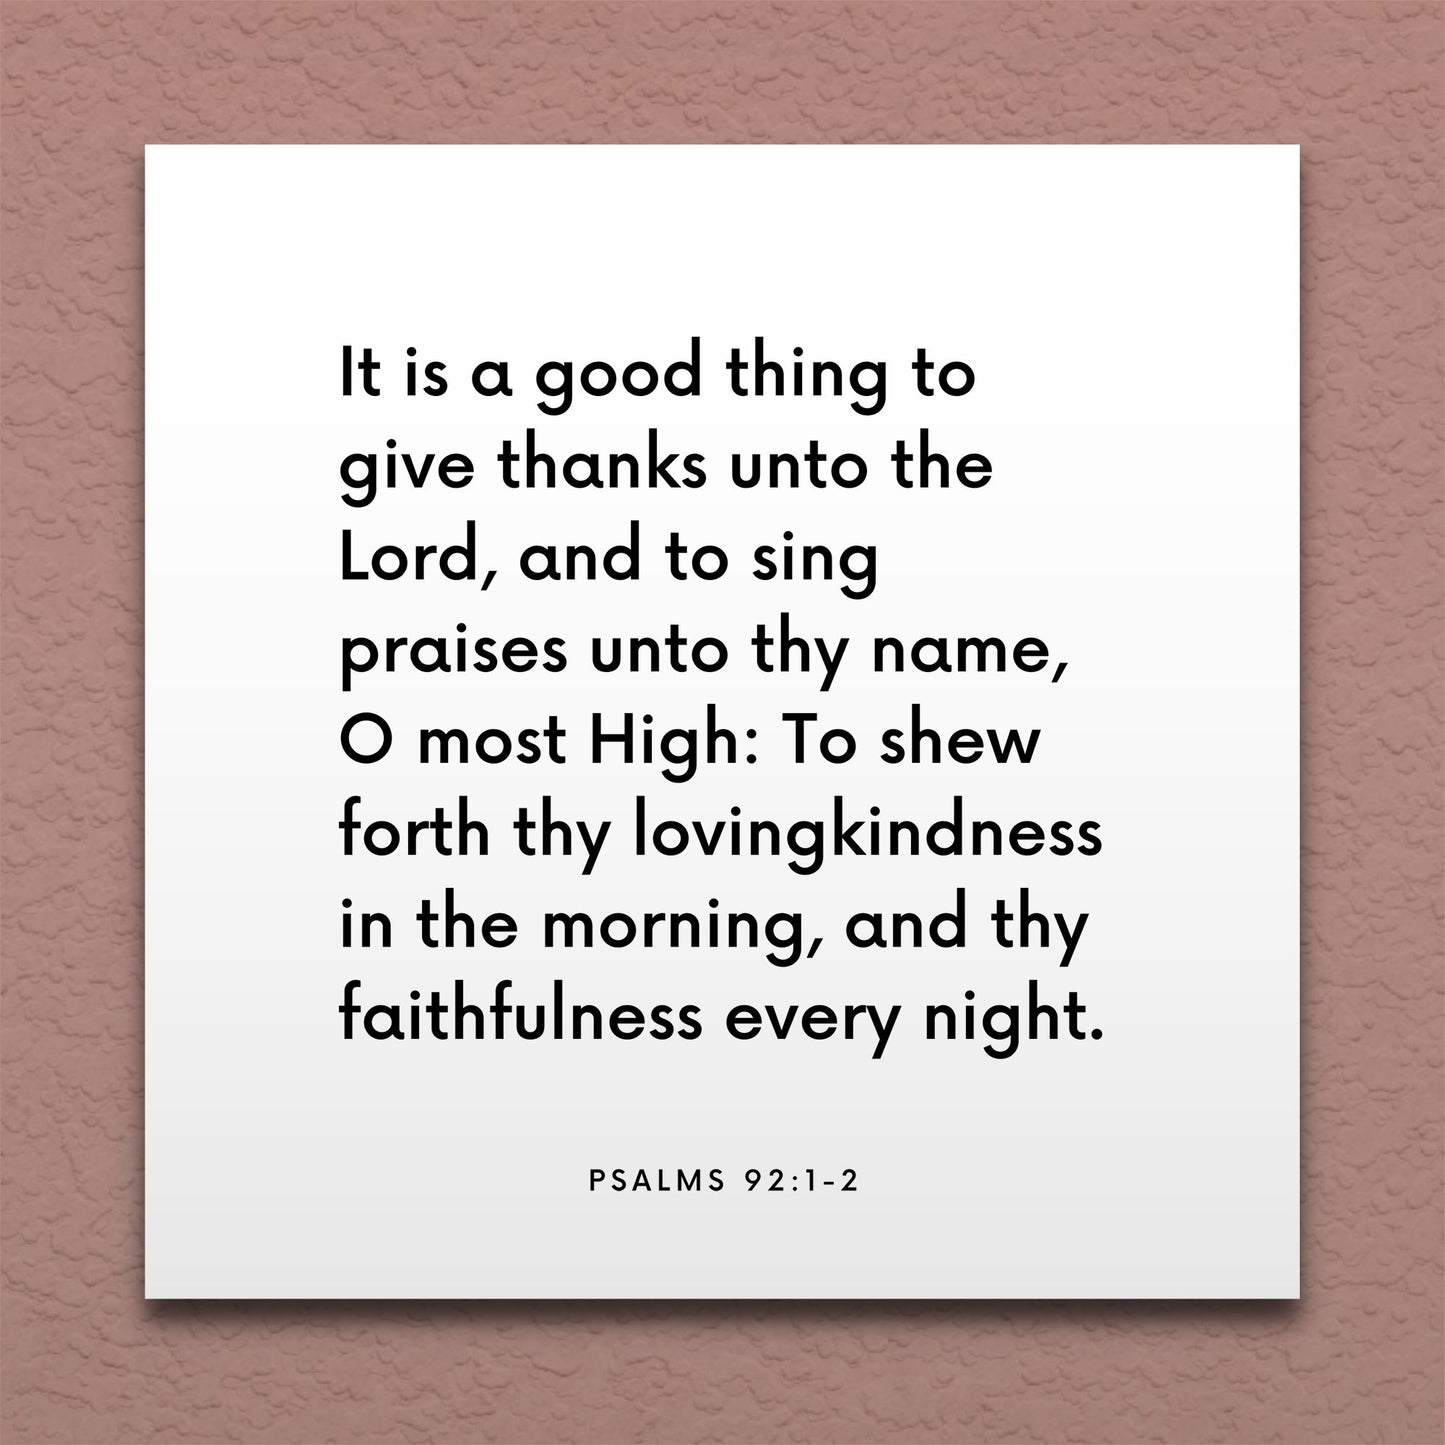 Wall-mounted scripture tile for Psalms 92:1-2 - "It is a good thing to give thanks unto the Lord"